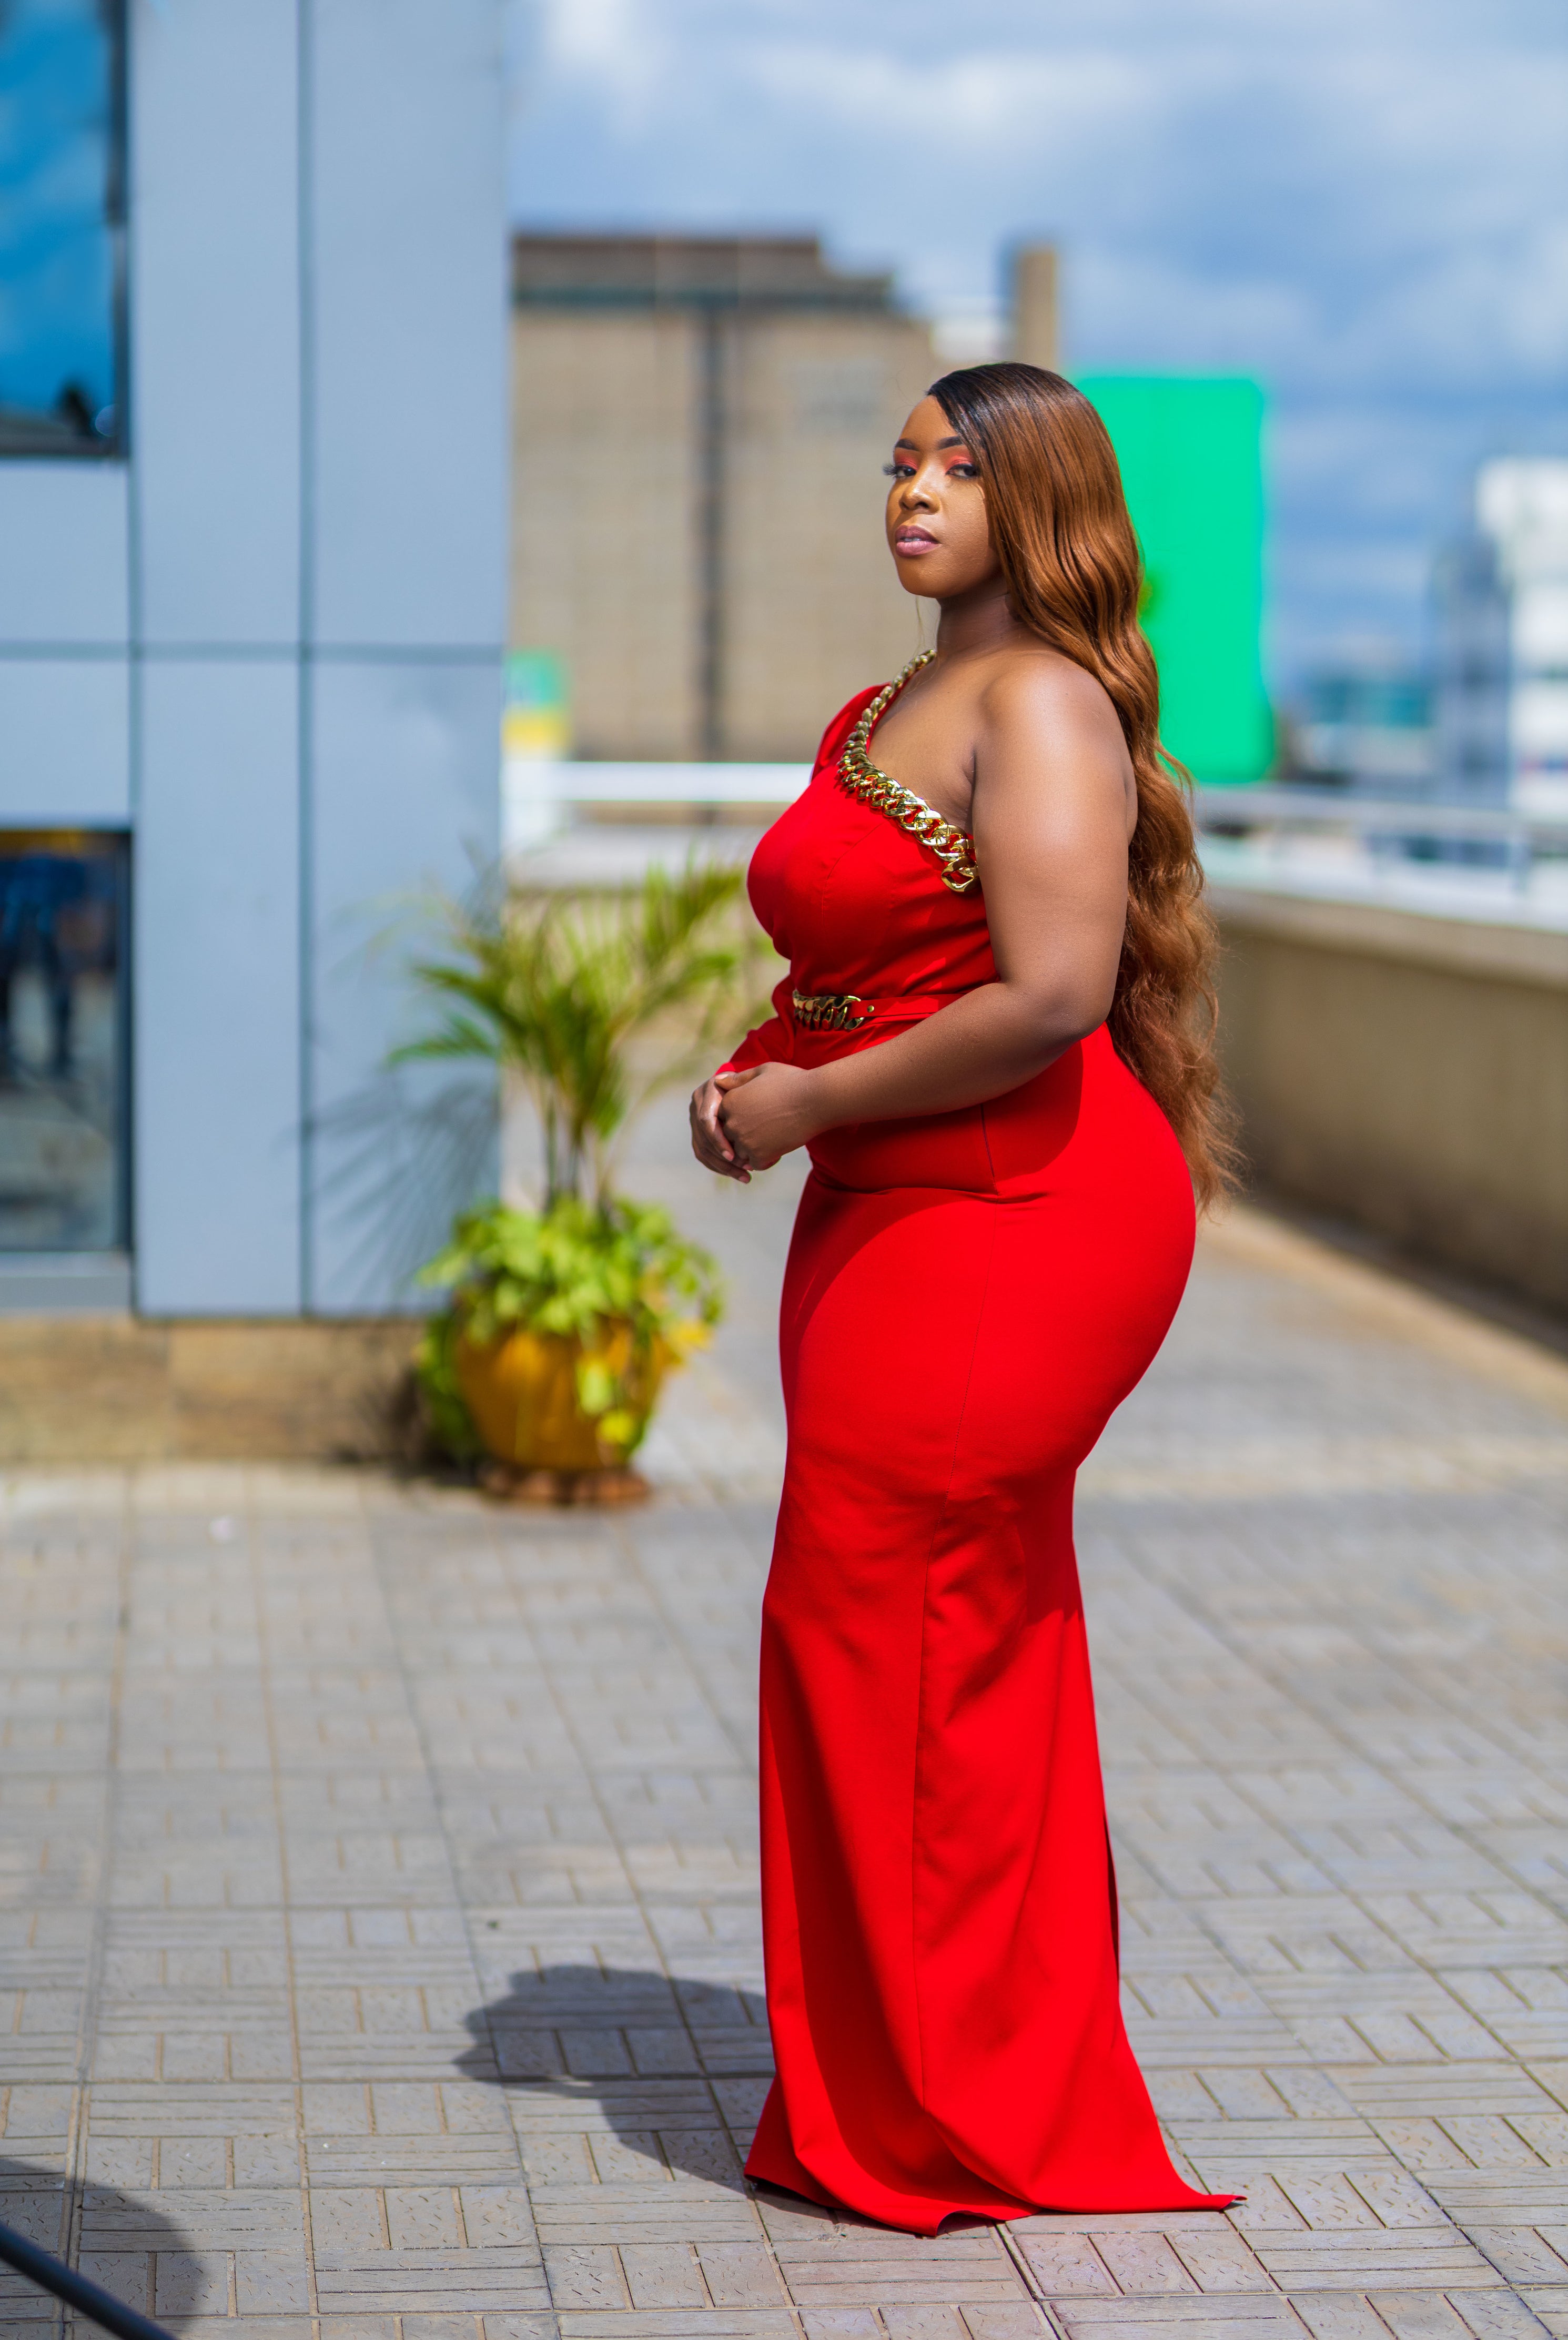 Quest Gown - Shop Kenya - Affordable Fashion Quest Gown hiiii_style Gown quest-gown chelsea_okwako93, Fervente One Hand Chain Gown Shop Kenya - Affordable Fashion